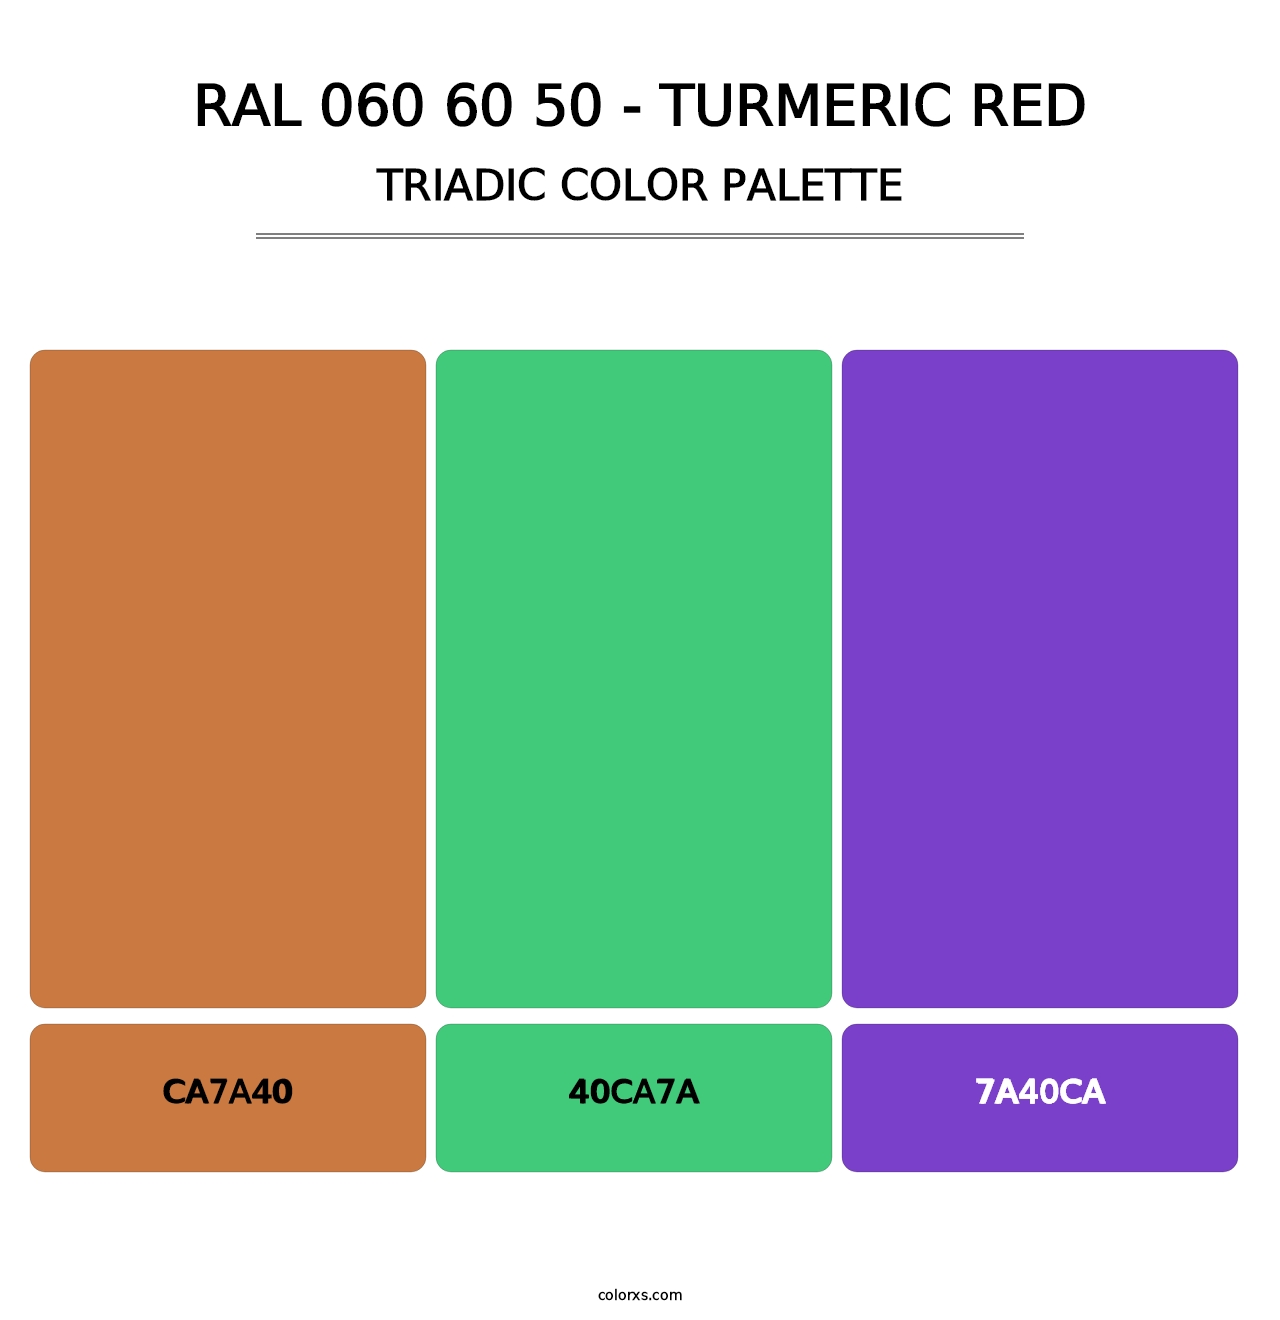 RAL 060 60 50 - Turmeric Red - Triadic Color Palette